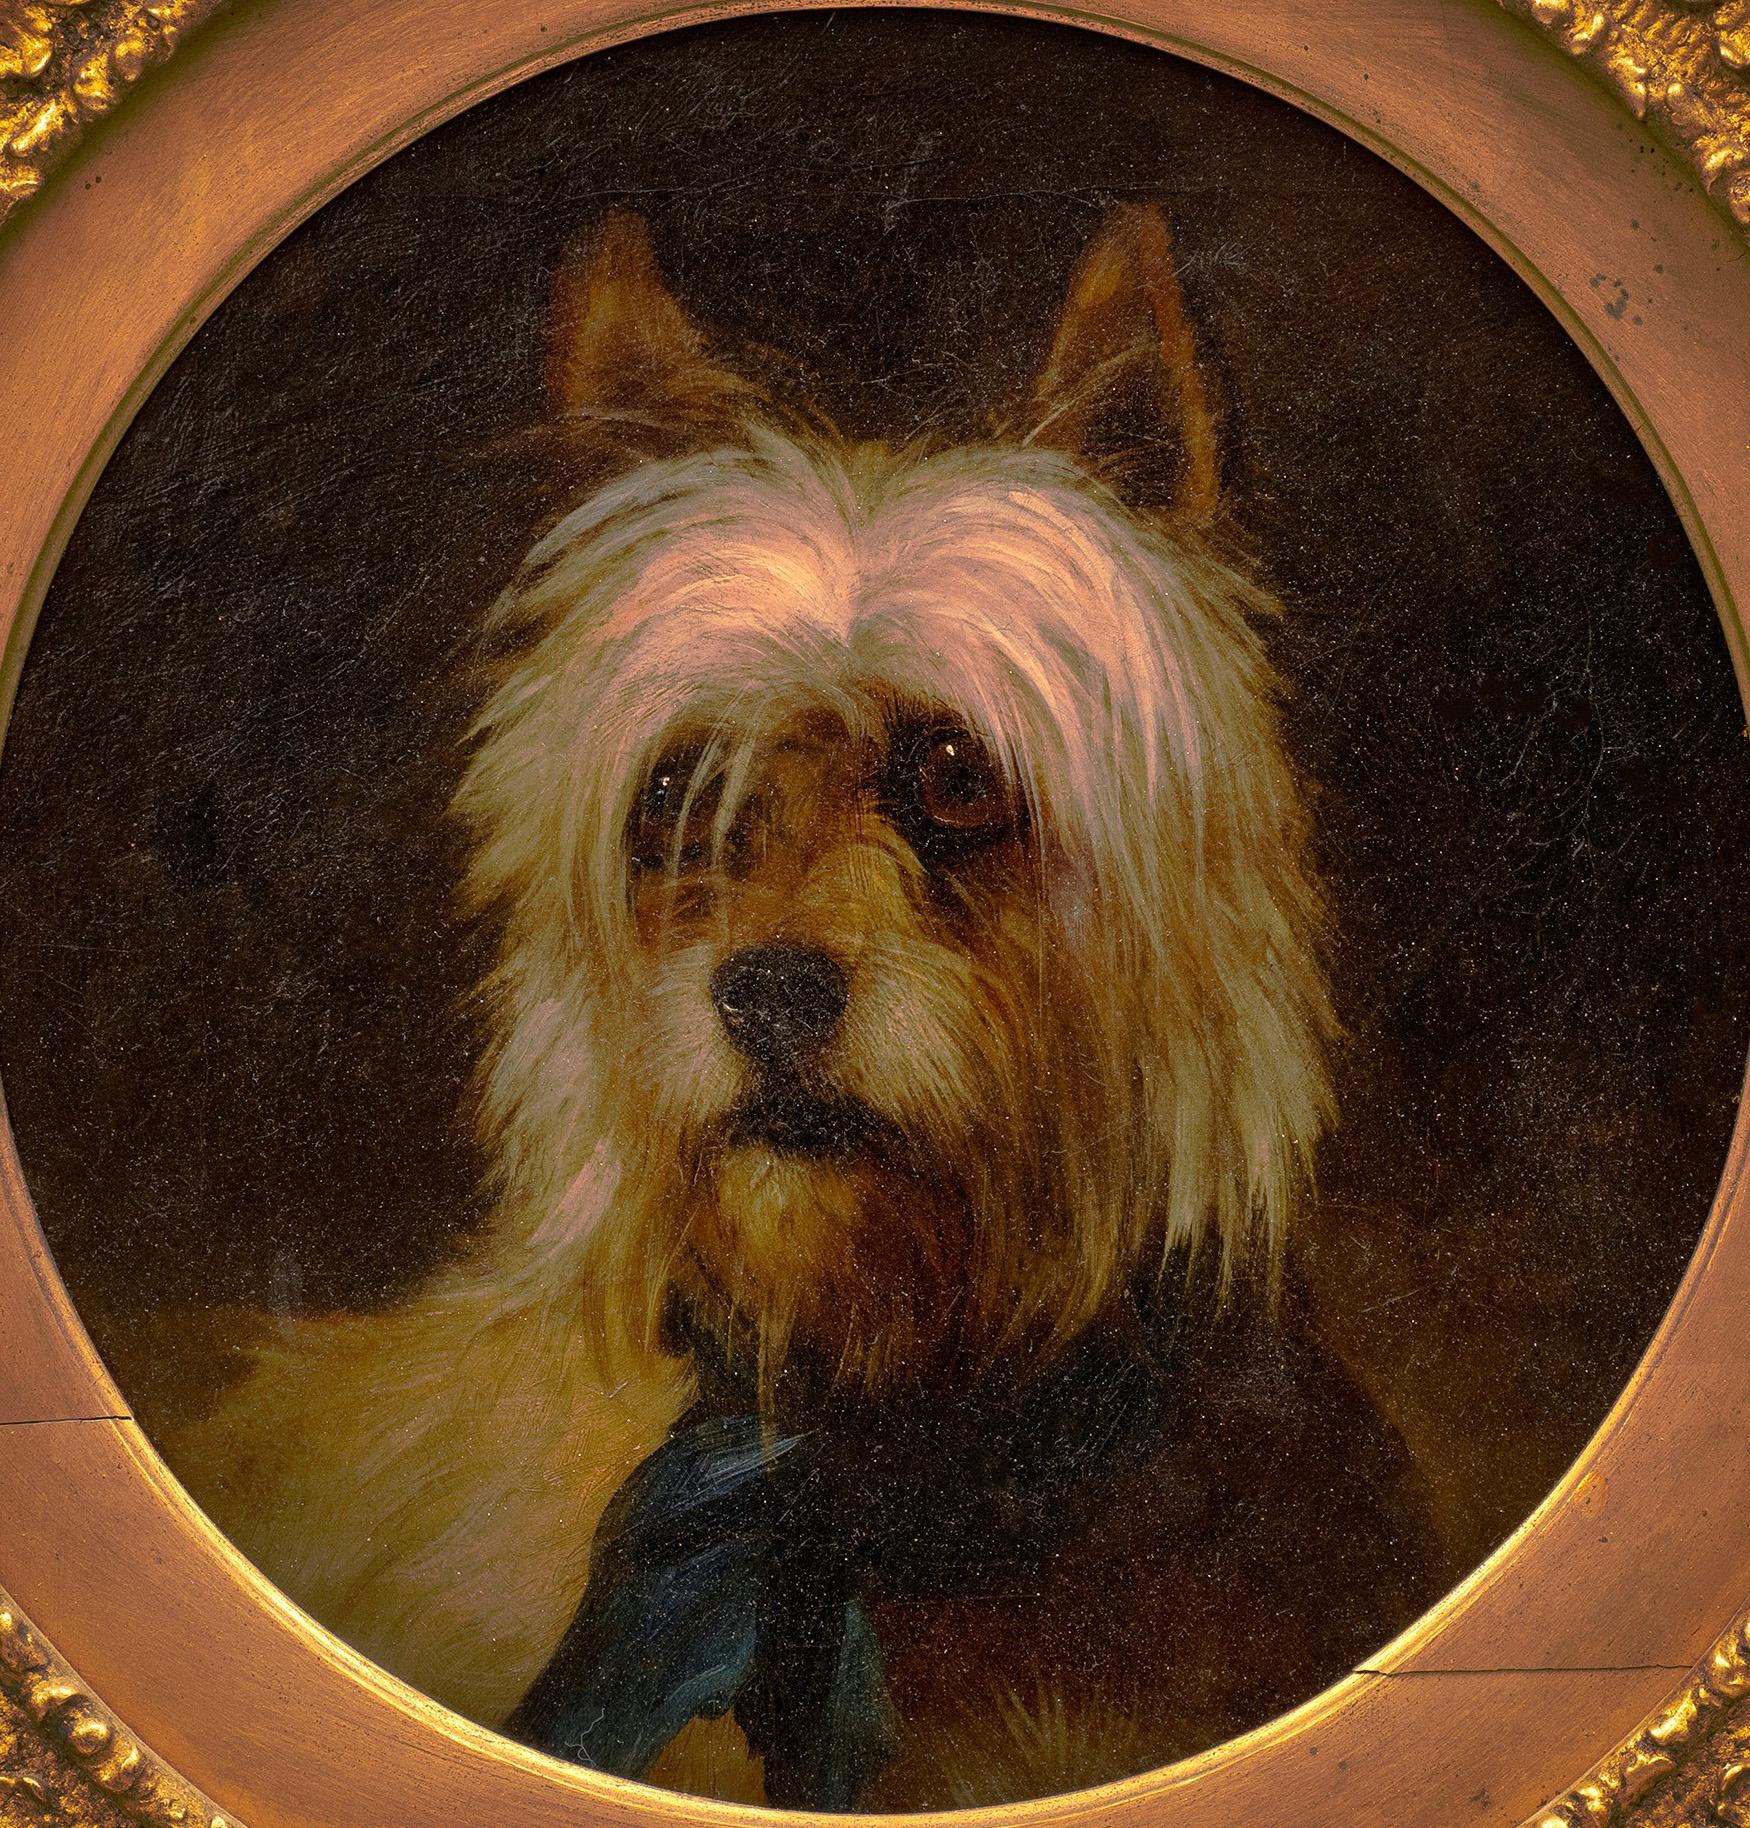 Antique Dog Painting of a Terrier: “The Shah” 
George Earl (England, 1824-1908)
Circa 1870
Oil on canvas.
12 ¾ x 12 ¾ (21 x 21 frame) inches.
Original ornate gilt stucco frame.

Superb animal painting by George Earl, a great specialist in the genre.